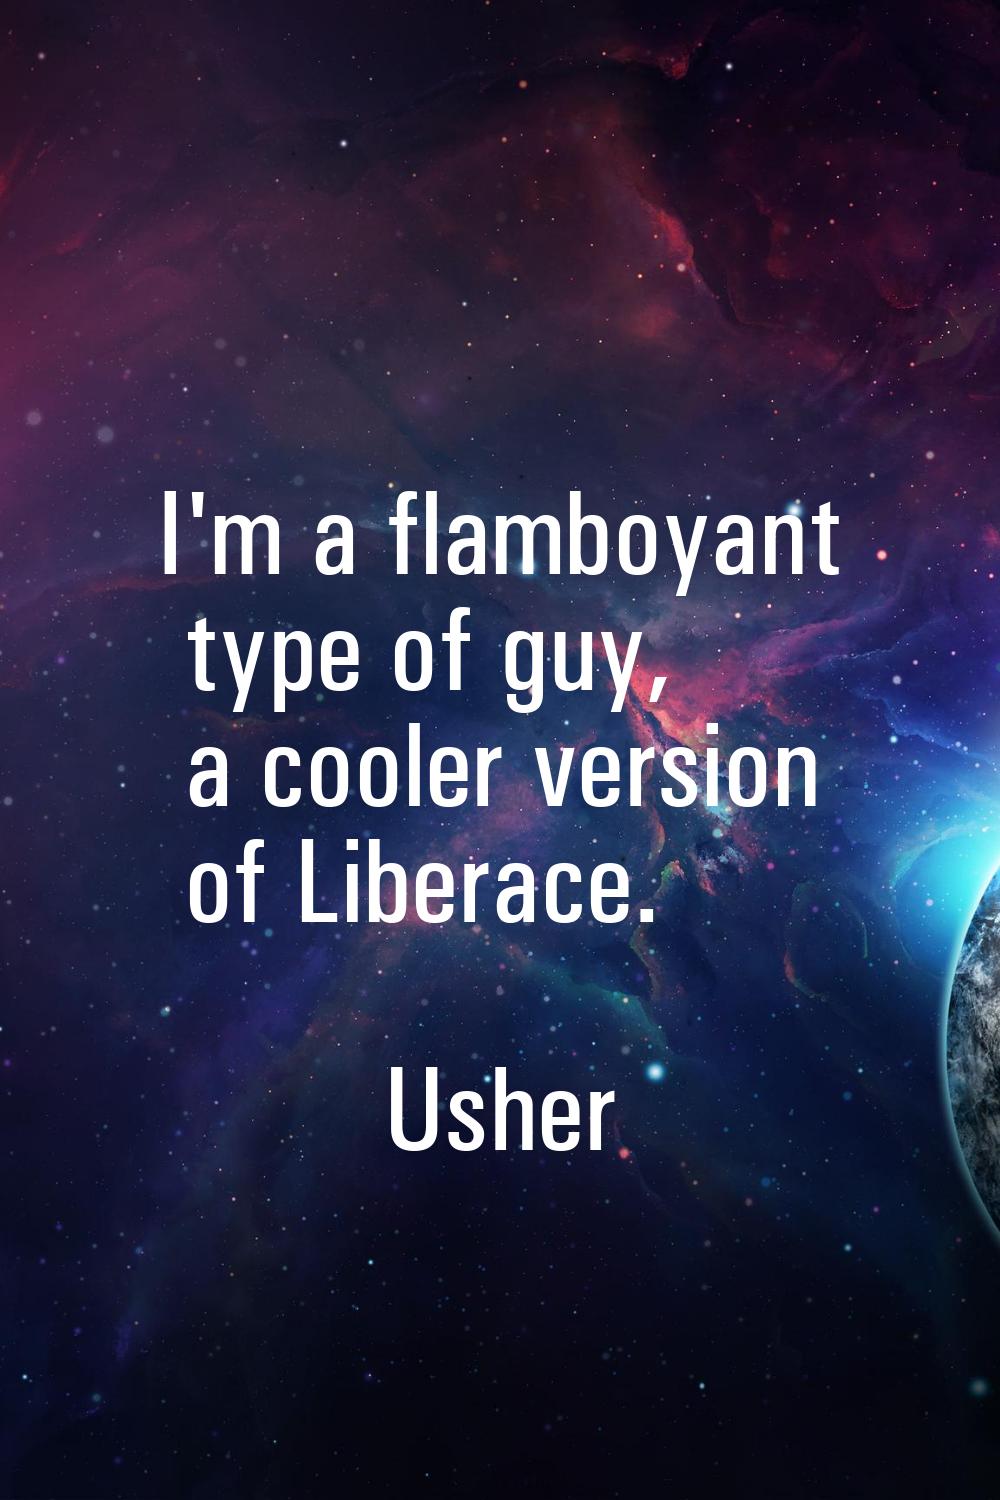 I'm a flamboyant type of guy, a cooler version of Liberace.